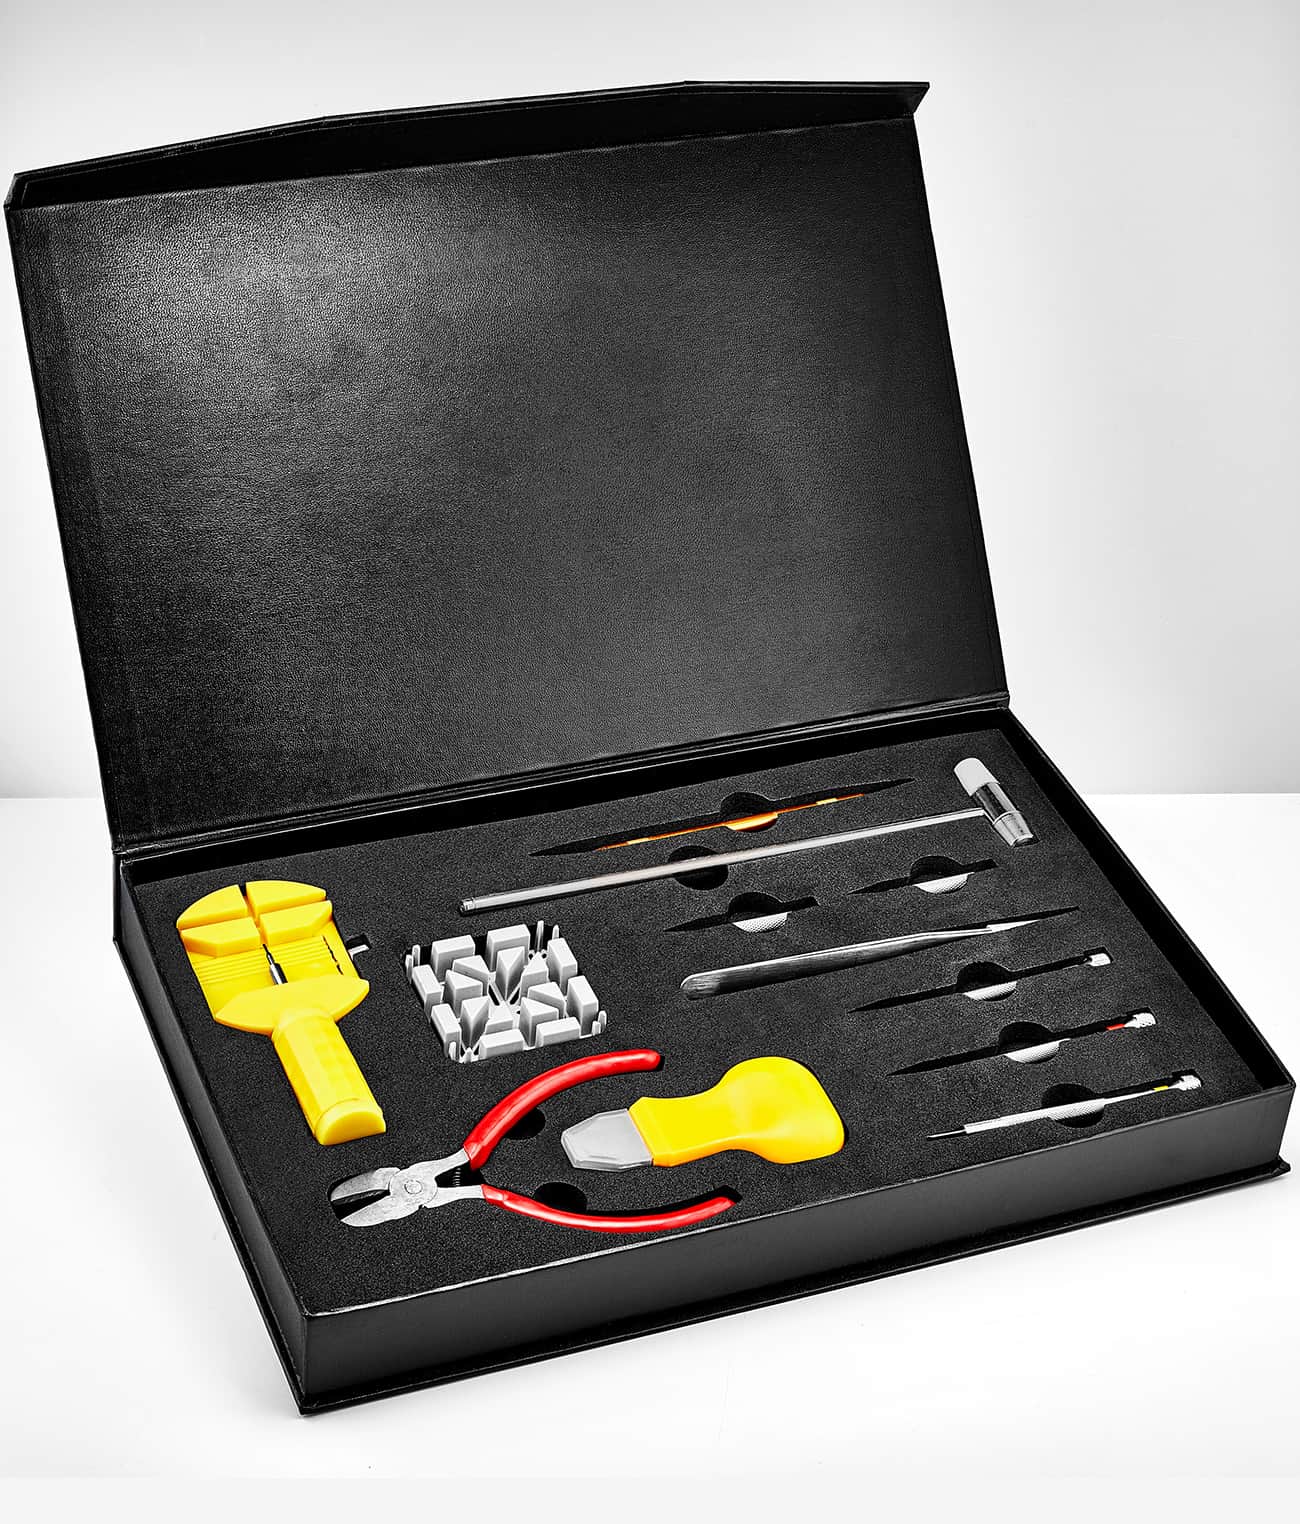 Depthmaster 883.01, Sion 1001.01, Signature Pen, and Watch Tool Kit